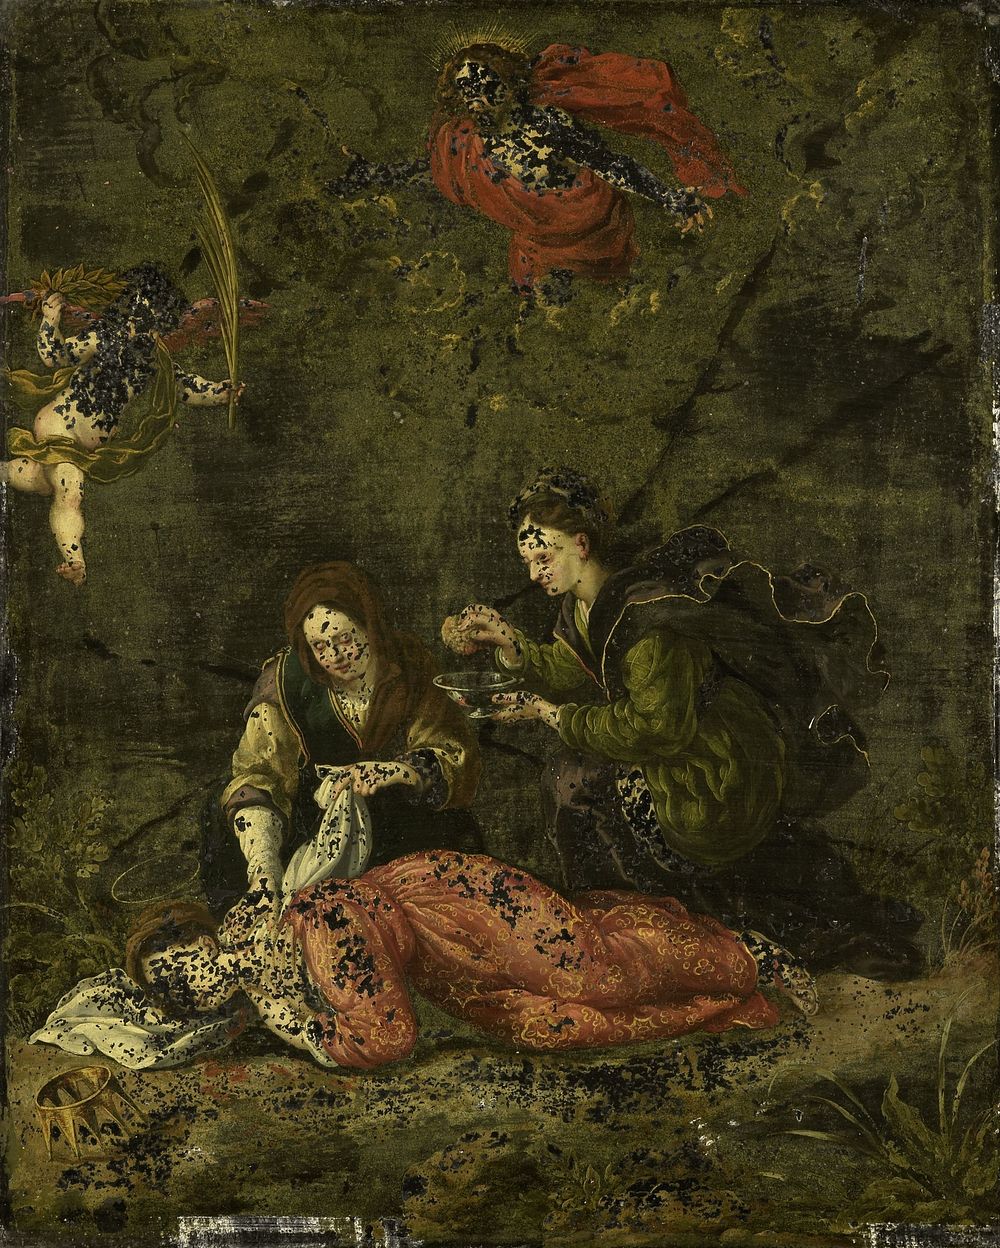 Death of St Cecilia (c. 1600) by anonymous and Hieronymus Wierix